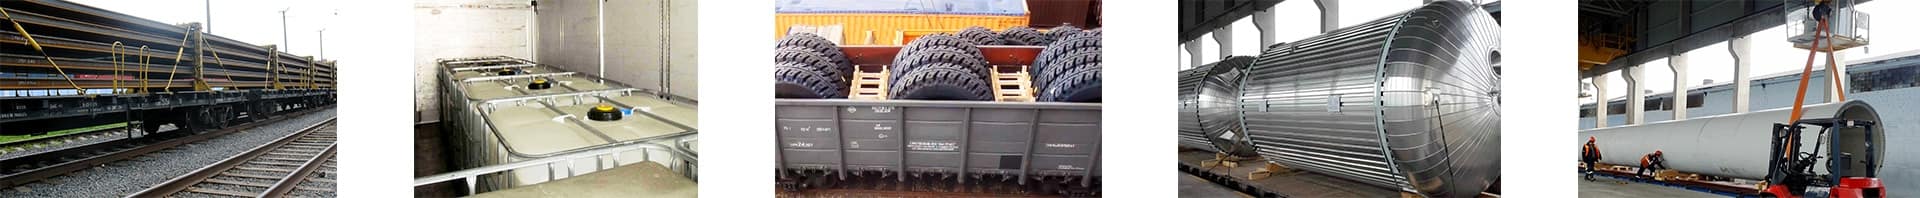 steel beams kegs tyres and windmill parts loaded on open platform wagons